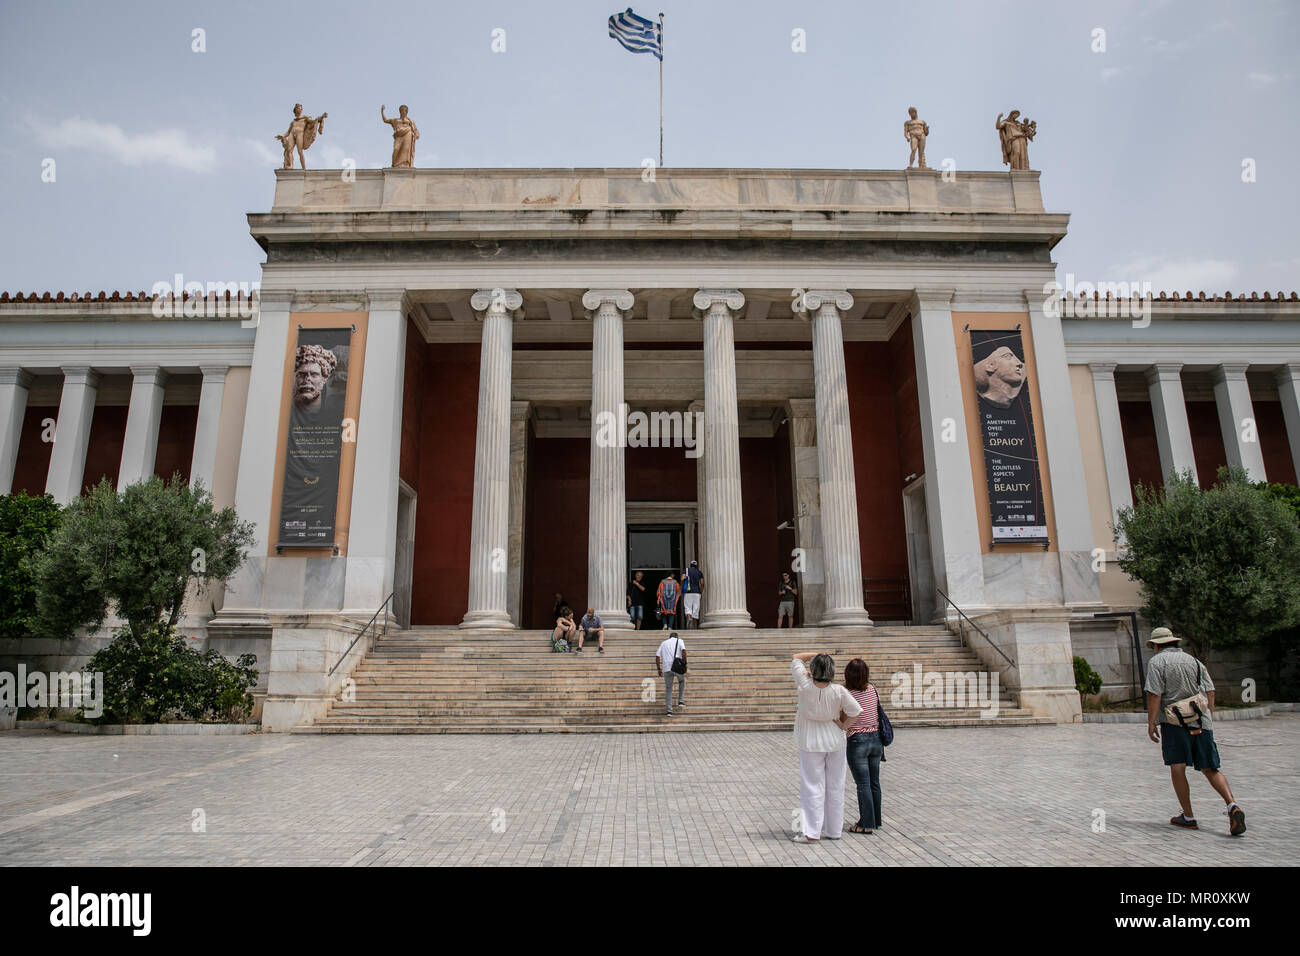 Athens. 23rd May, 2018. Picture taken on May 23, 2018 shows the building of the National Archaeological Museum in Athens, Greece. Located in the center of Athens, the National Archaeological Museum houses more than 20,000 exhibits, including the world's finest collection of Greek antiquities. Credit: Lefteris Partsalis/Xinhua/Alamy Live News Stock Photo